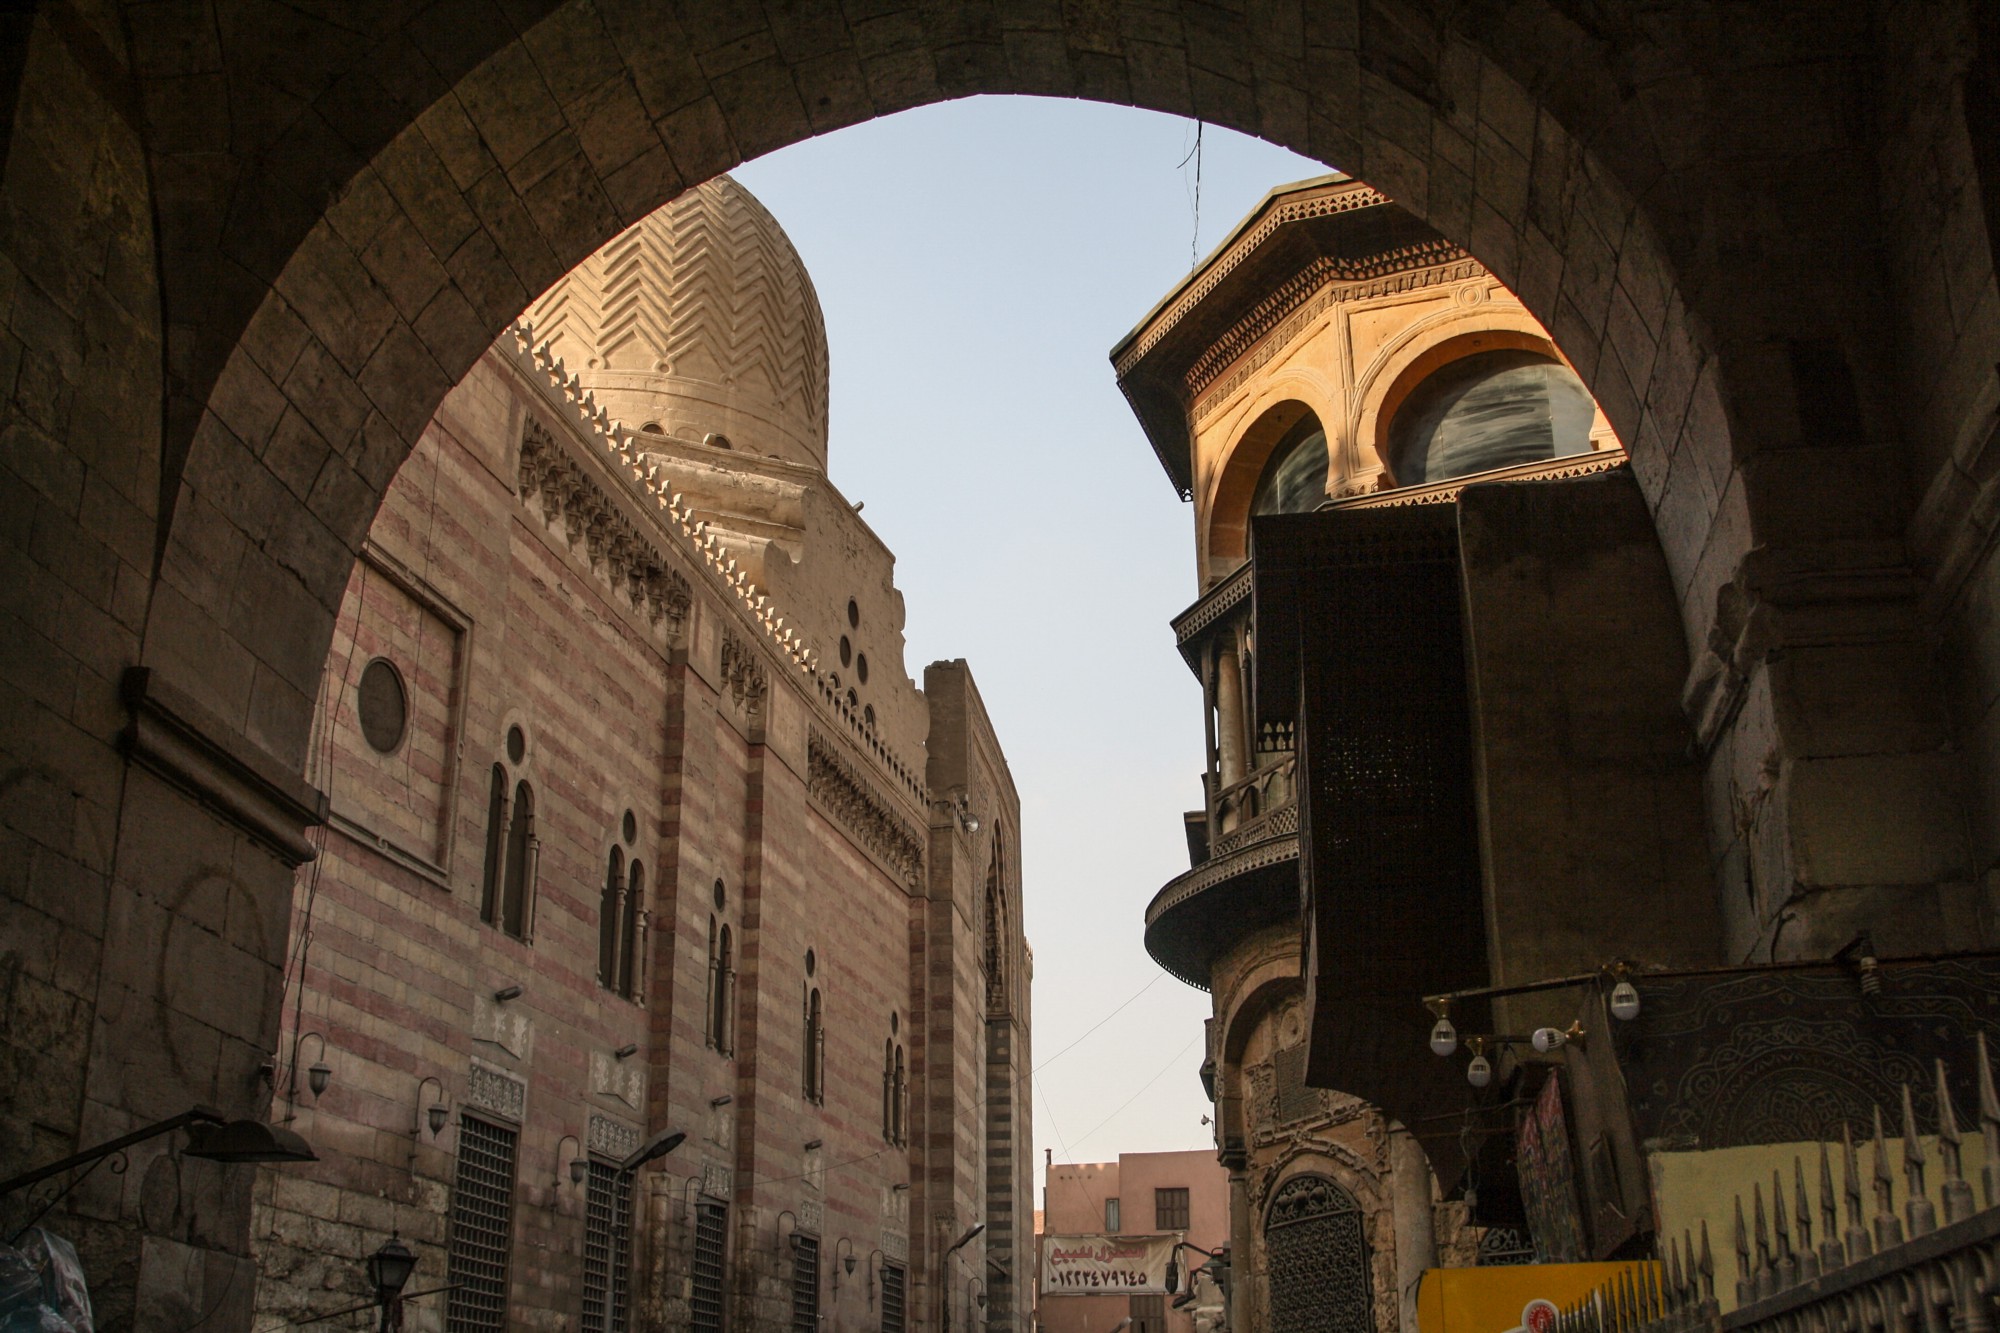 Entrance to Fatimid Cairo through Bab Zeweila, one of the old city gates. Credit Enas El Masry